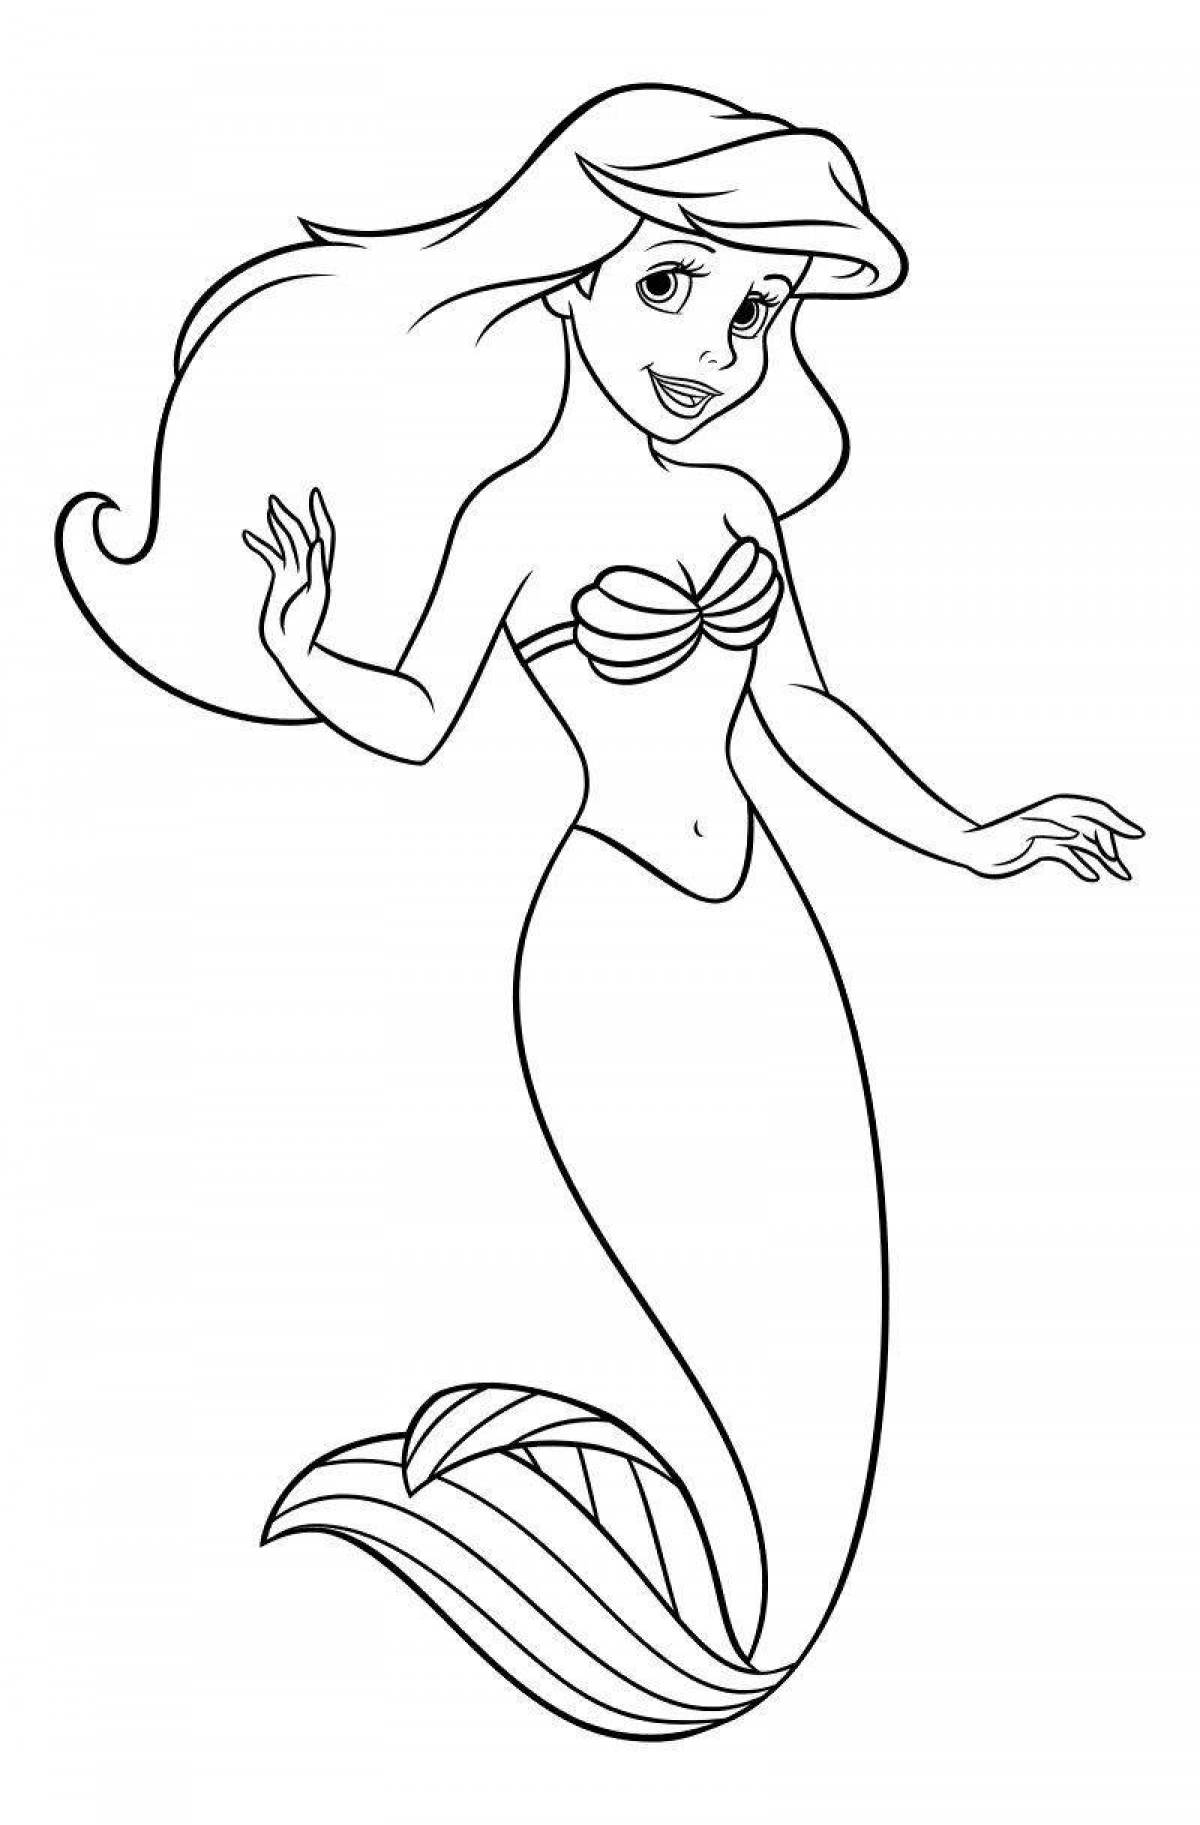 Radiant little mermaid coloring book for children 4-5 years old